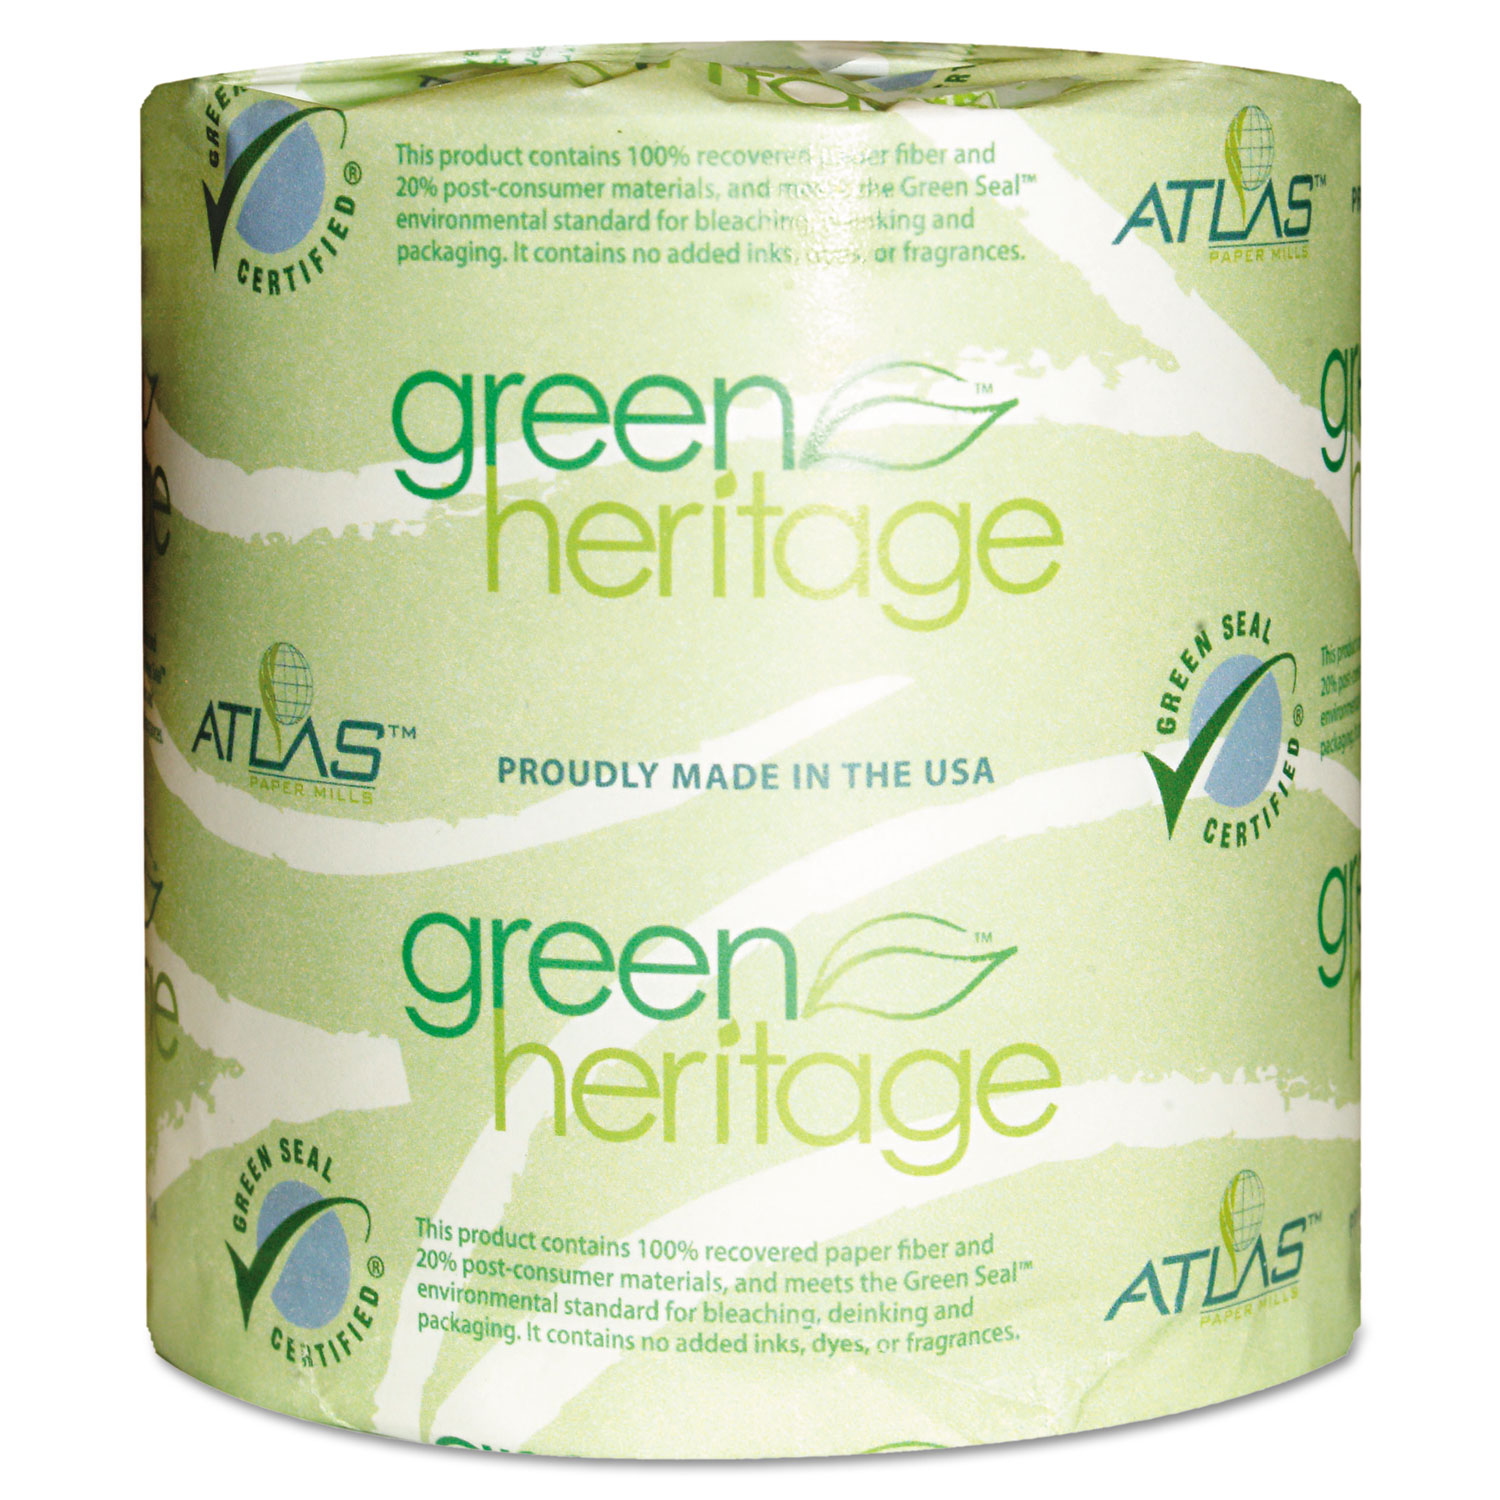 Green Heritage Toilet Tissue, 4.4 x 4.4 Sheets, 2-Ply, 500/Roll, 96 Rolls/CT